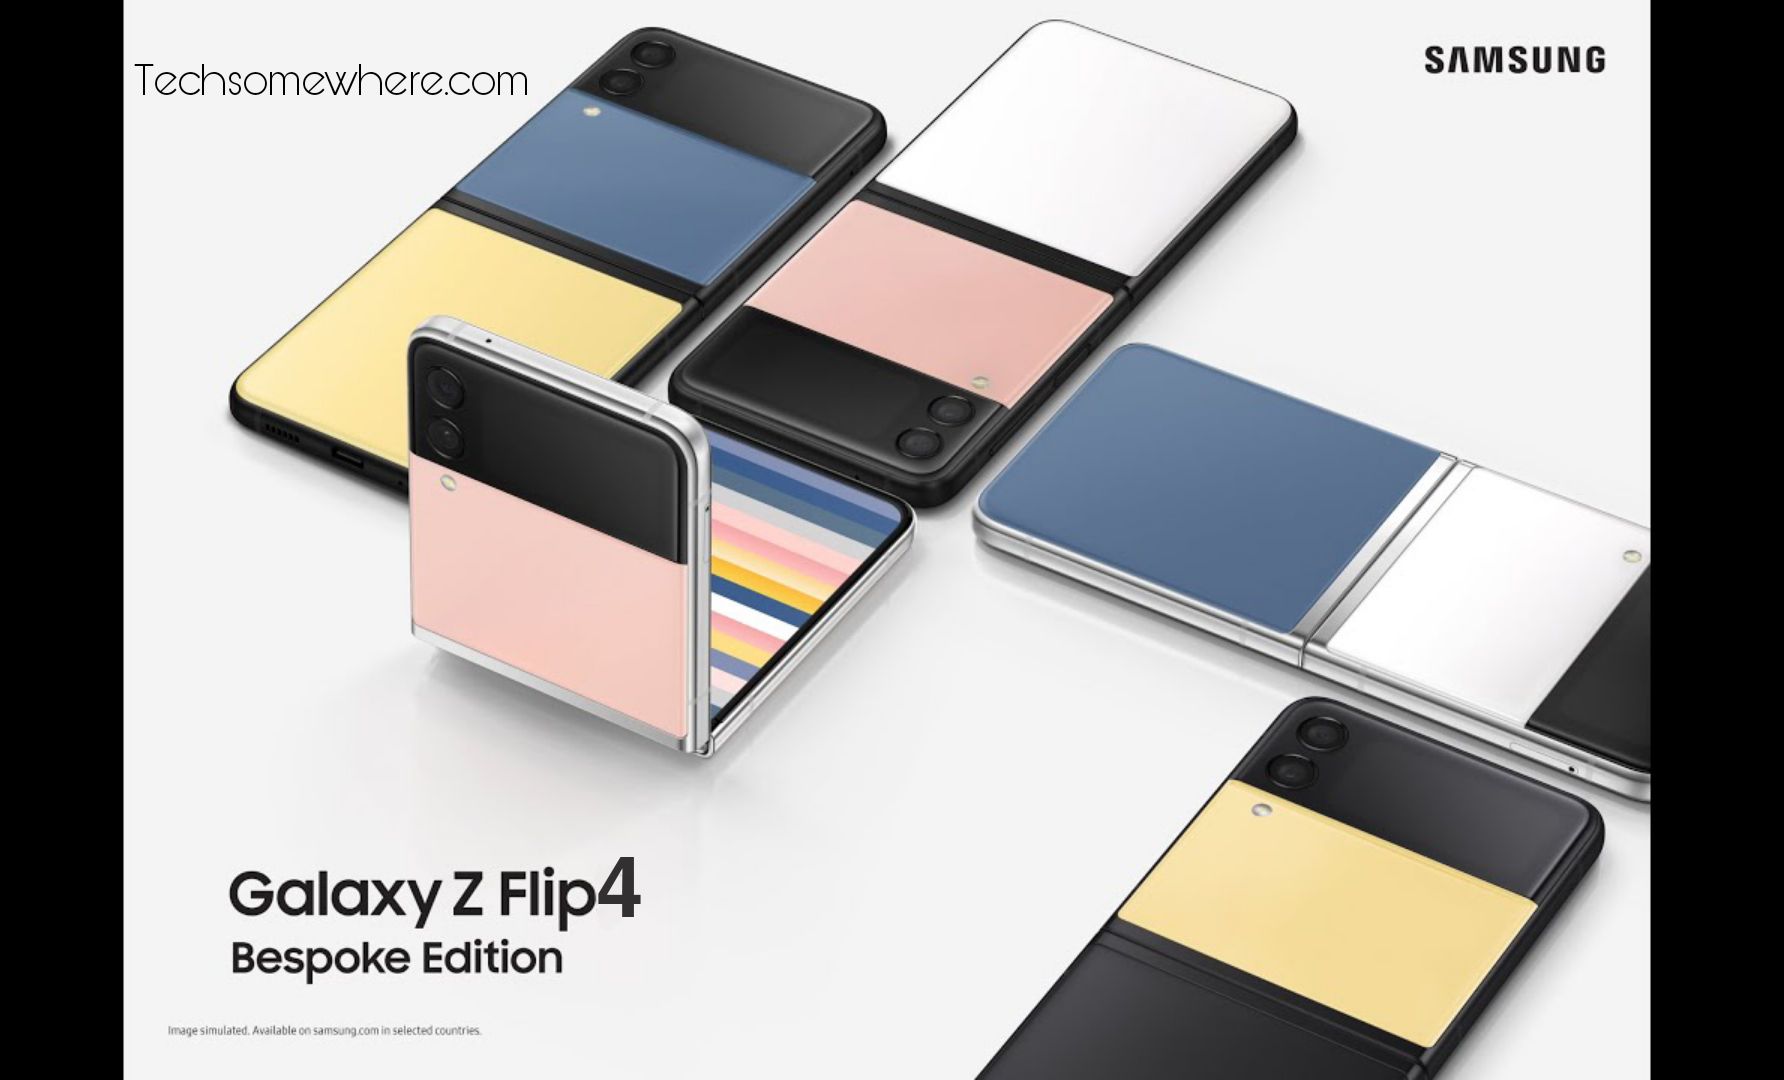 Samsung Galaxy Z Flip4 and Bespoke Edition Price, Amazing Specs & Release Date!